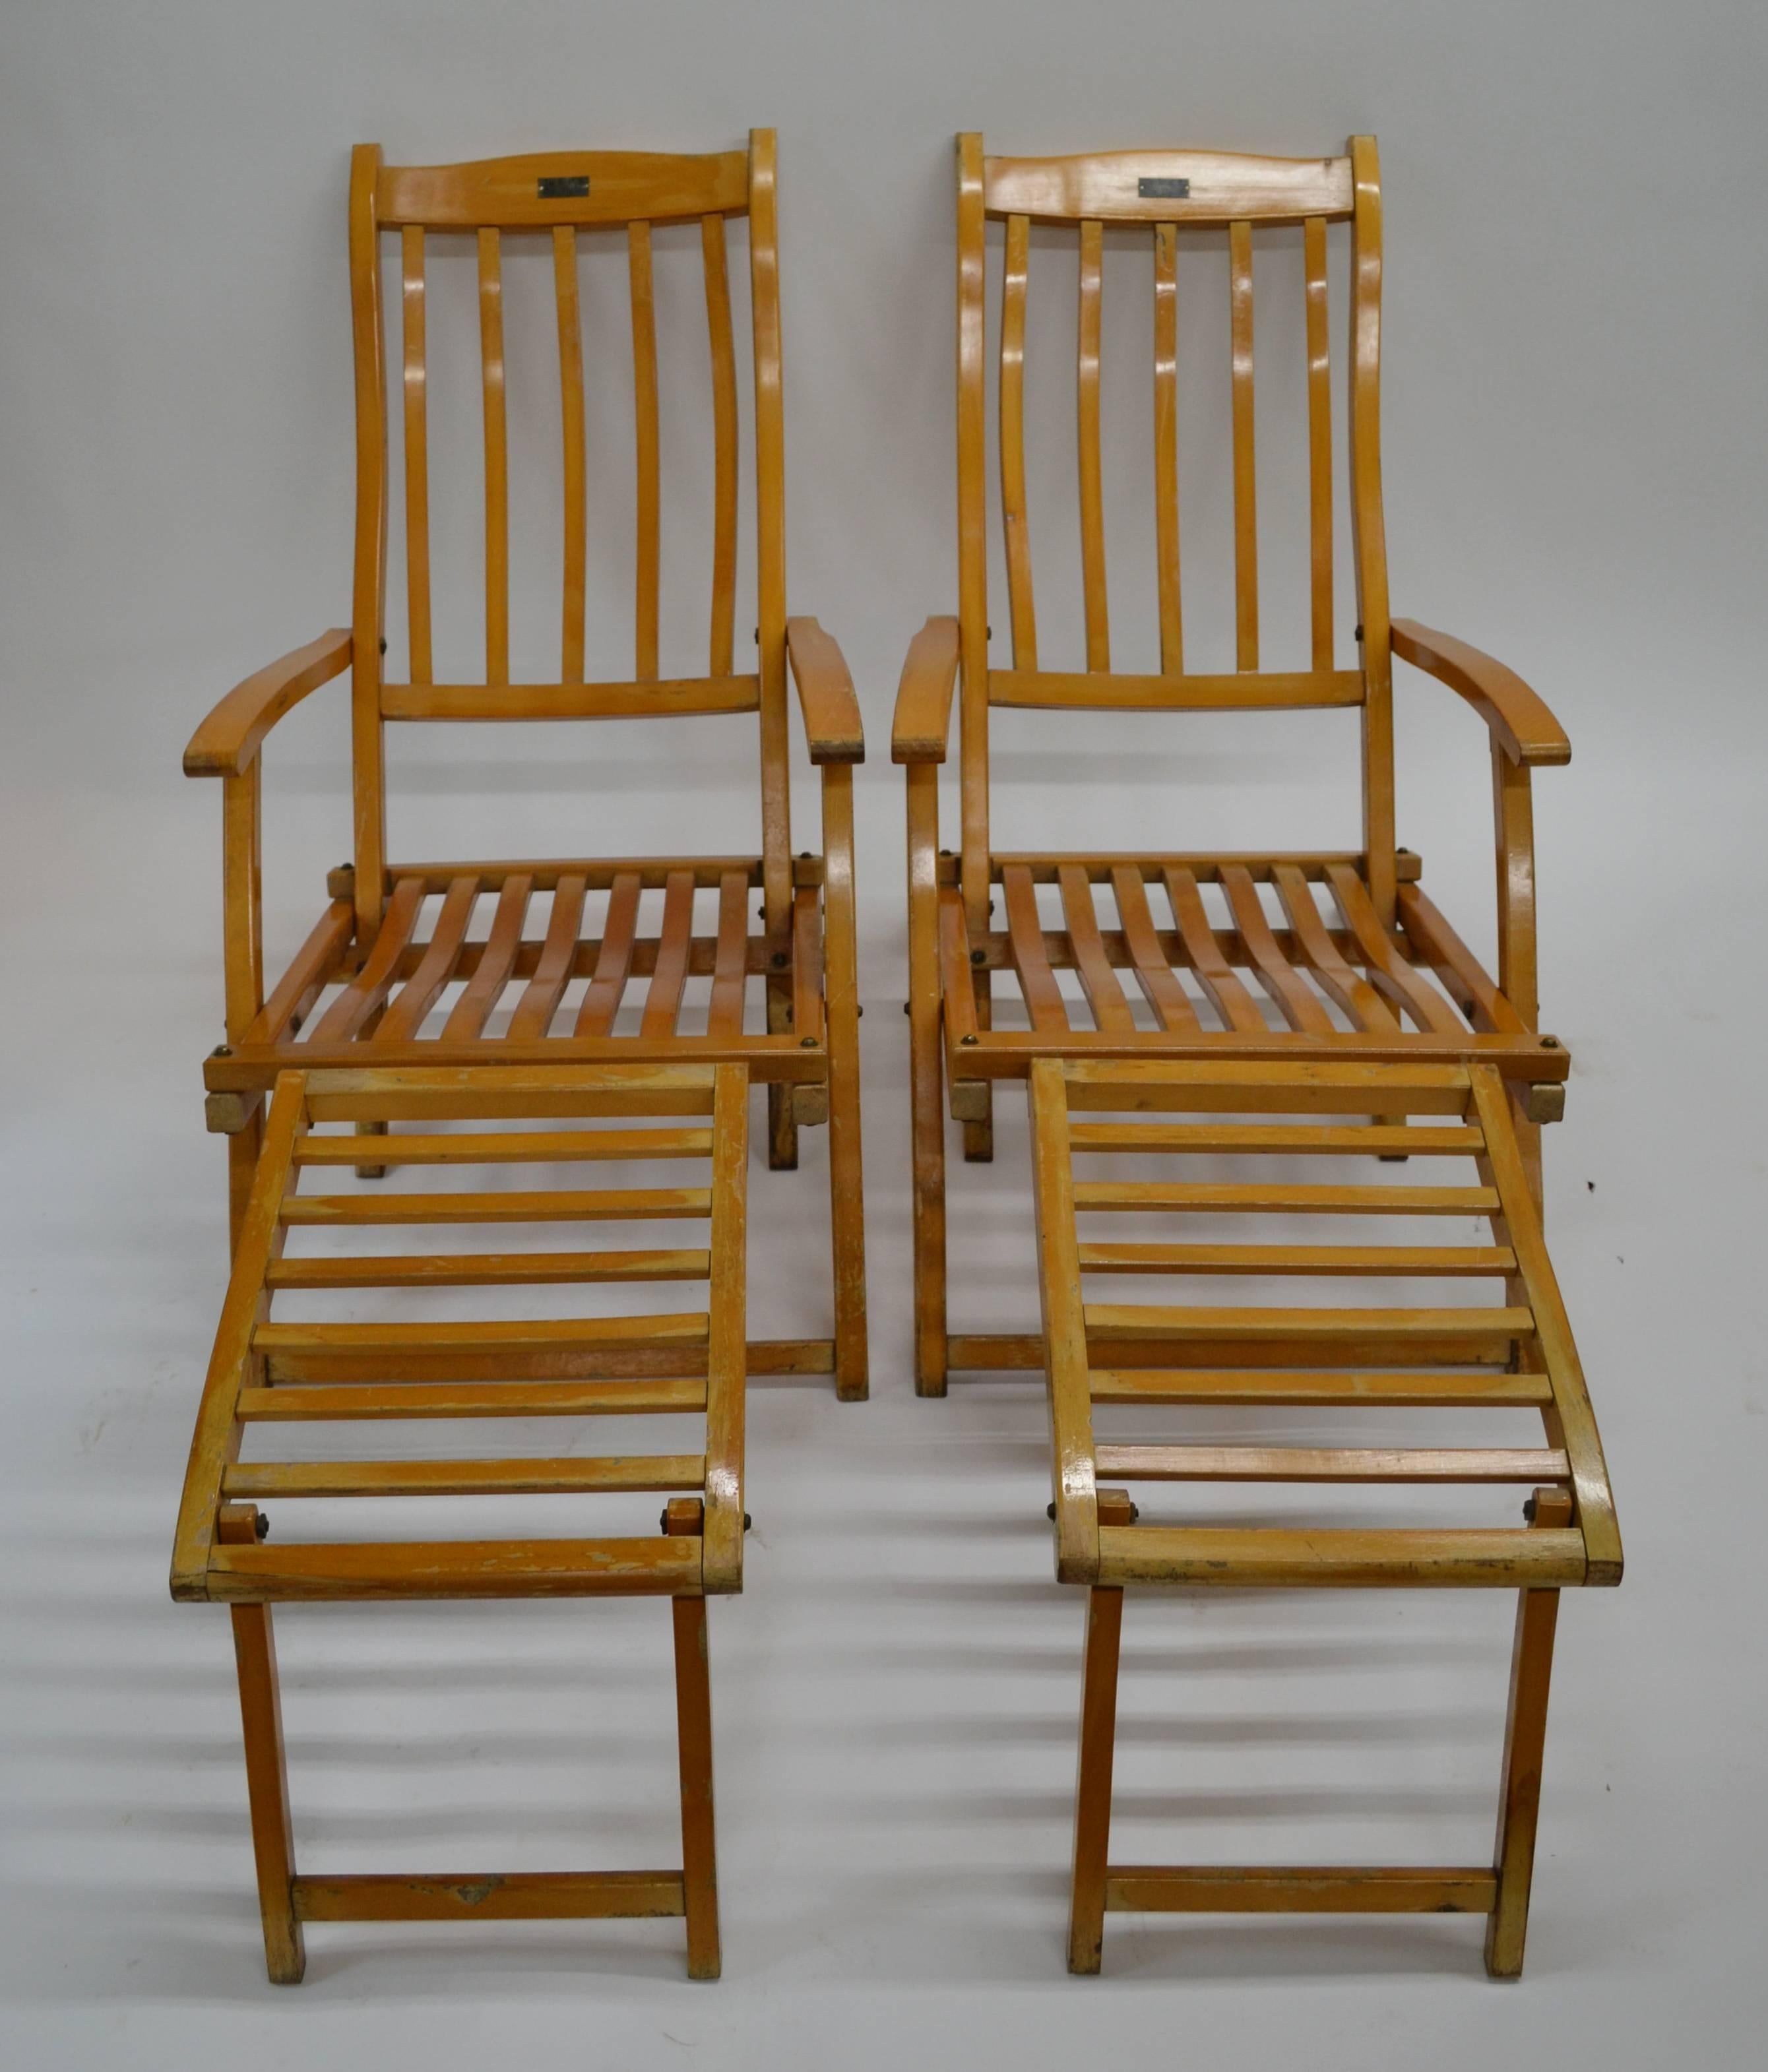 A fine pair of vintage folding hardwood ocean liner deck chairs with original fitted cushions. Each chair bears a metal plate on the top rail with the words “RMS Queen Elizabeth”. We are uncertain if these deck chairs are actually from the Queen